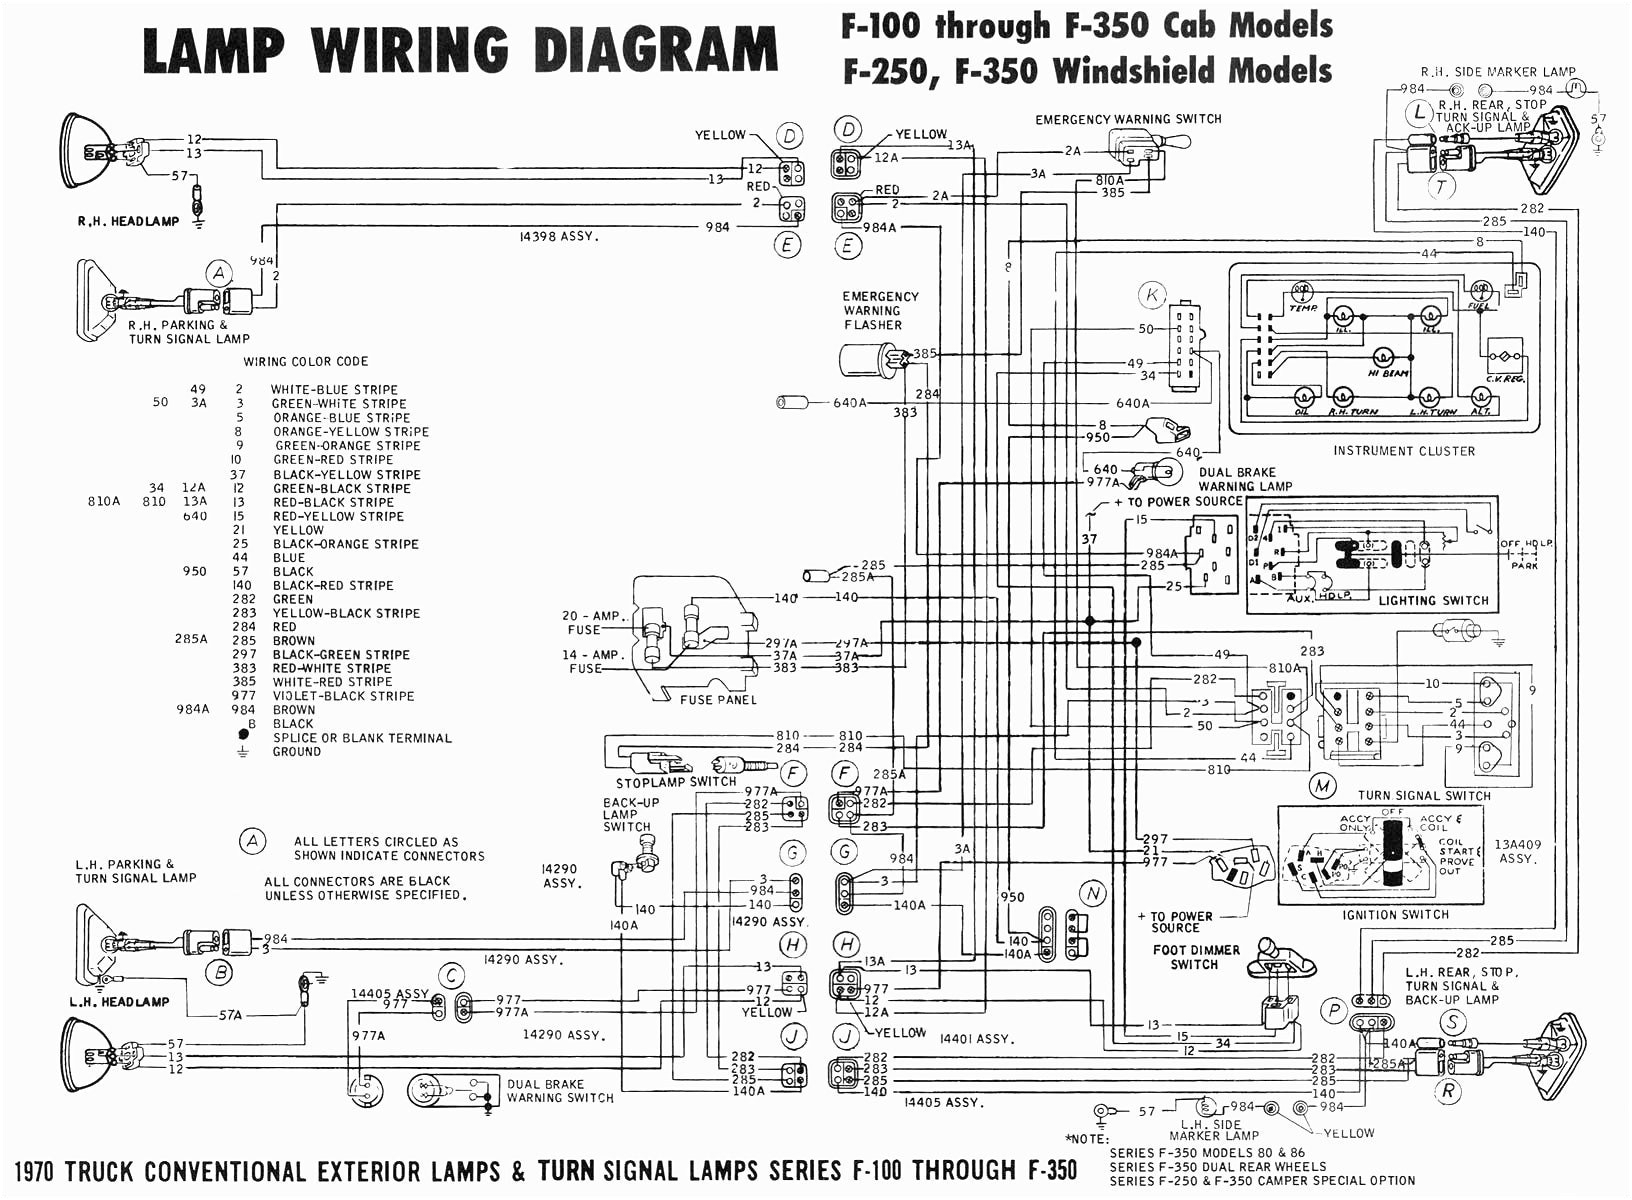 basic ignition switch wiring diagram for vehicle get free image basic ignition switch wiring diagram for vehicle get free image